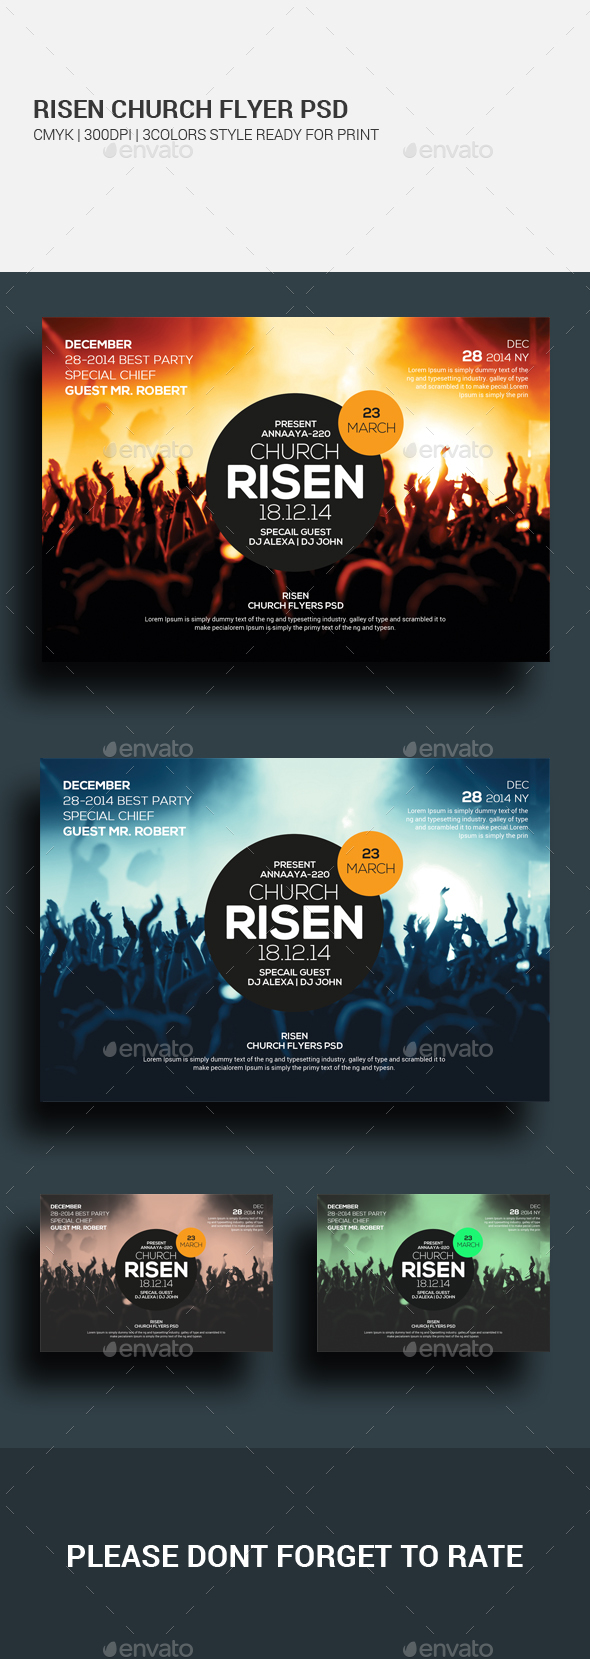 Easter Sunday Church Template Set With Easter Church Flyer Template Pertaining To Easter Church Flyer Template